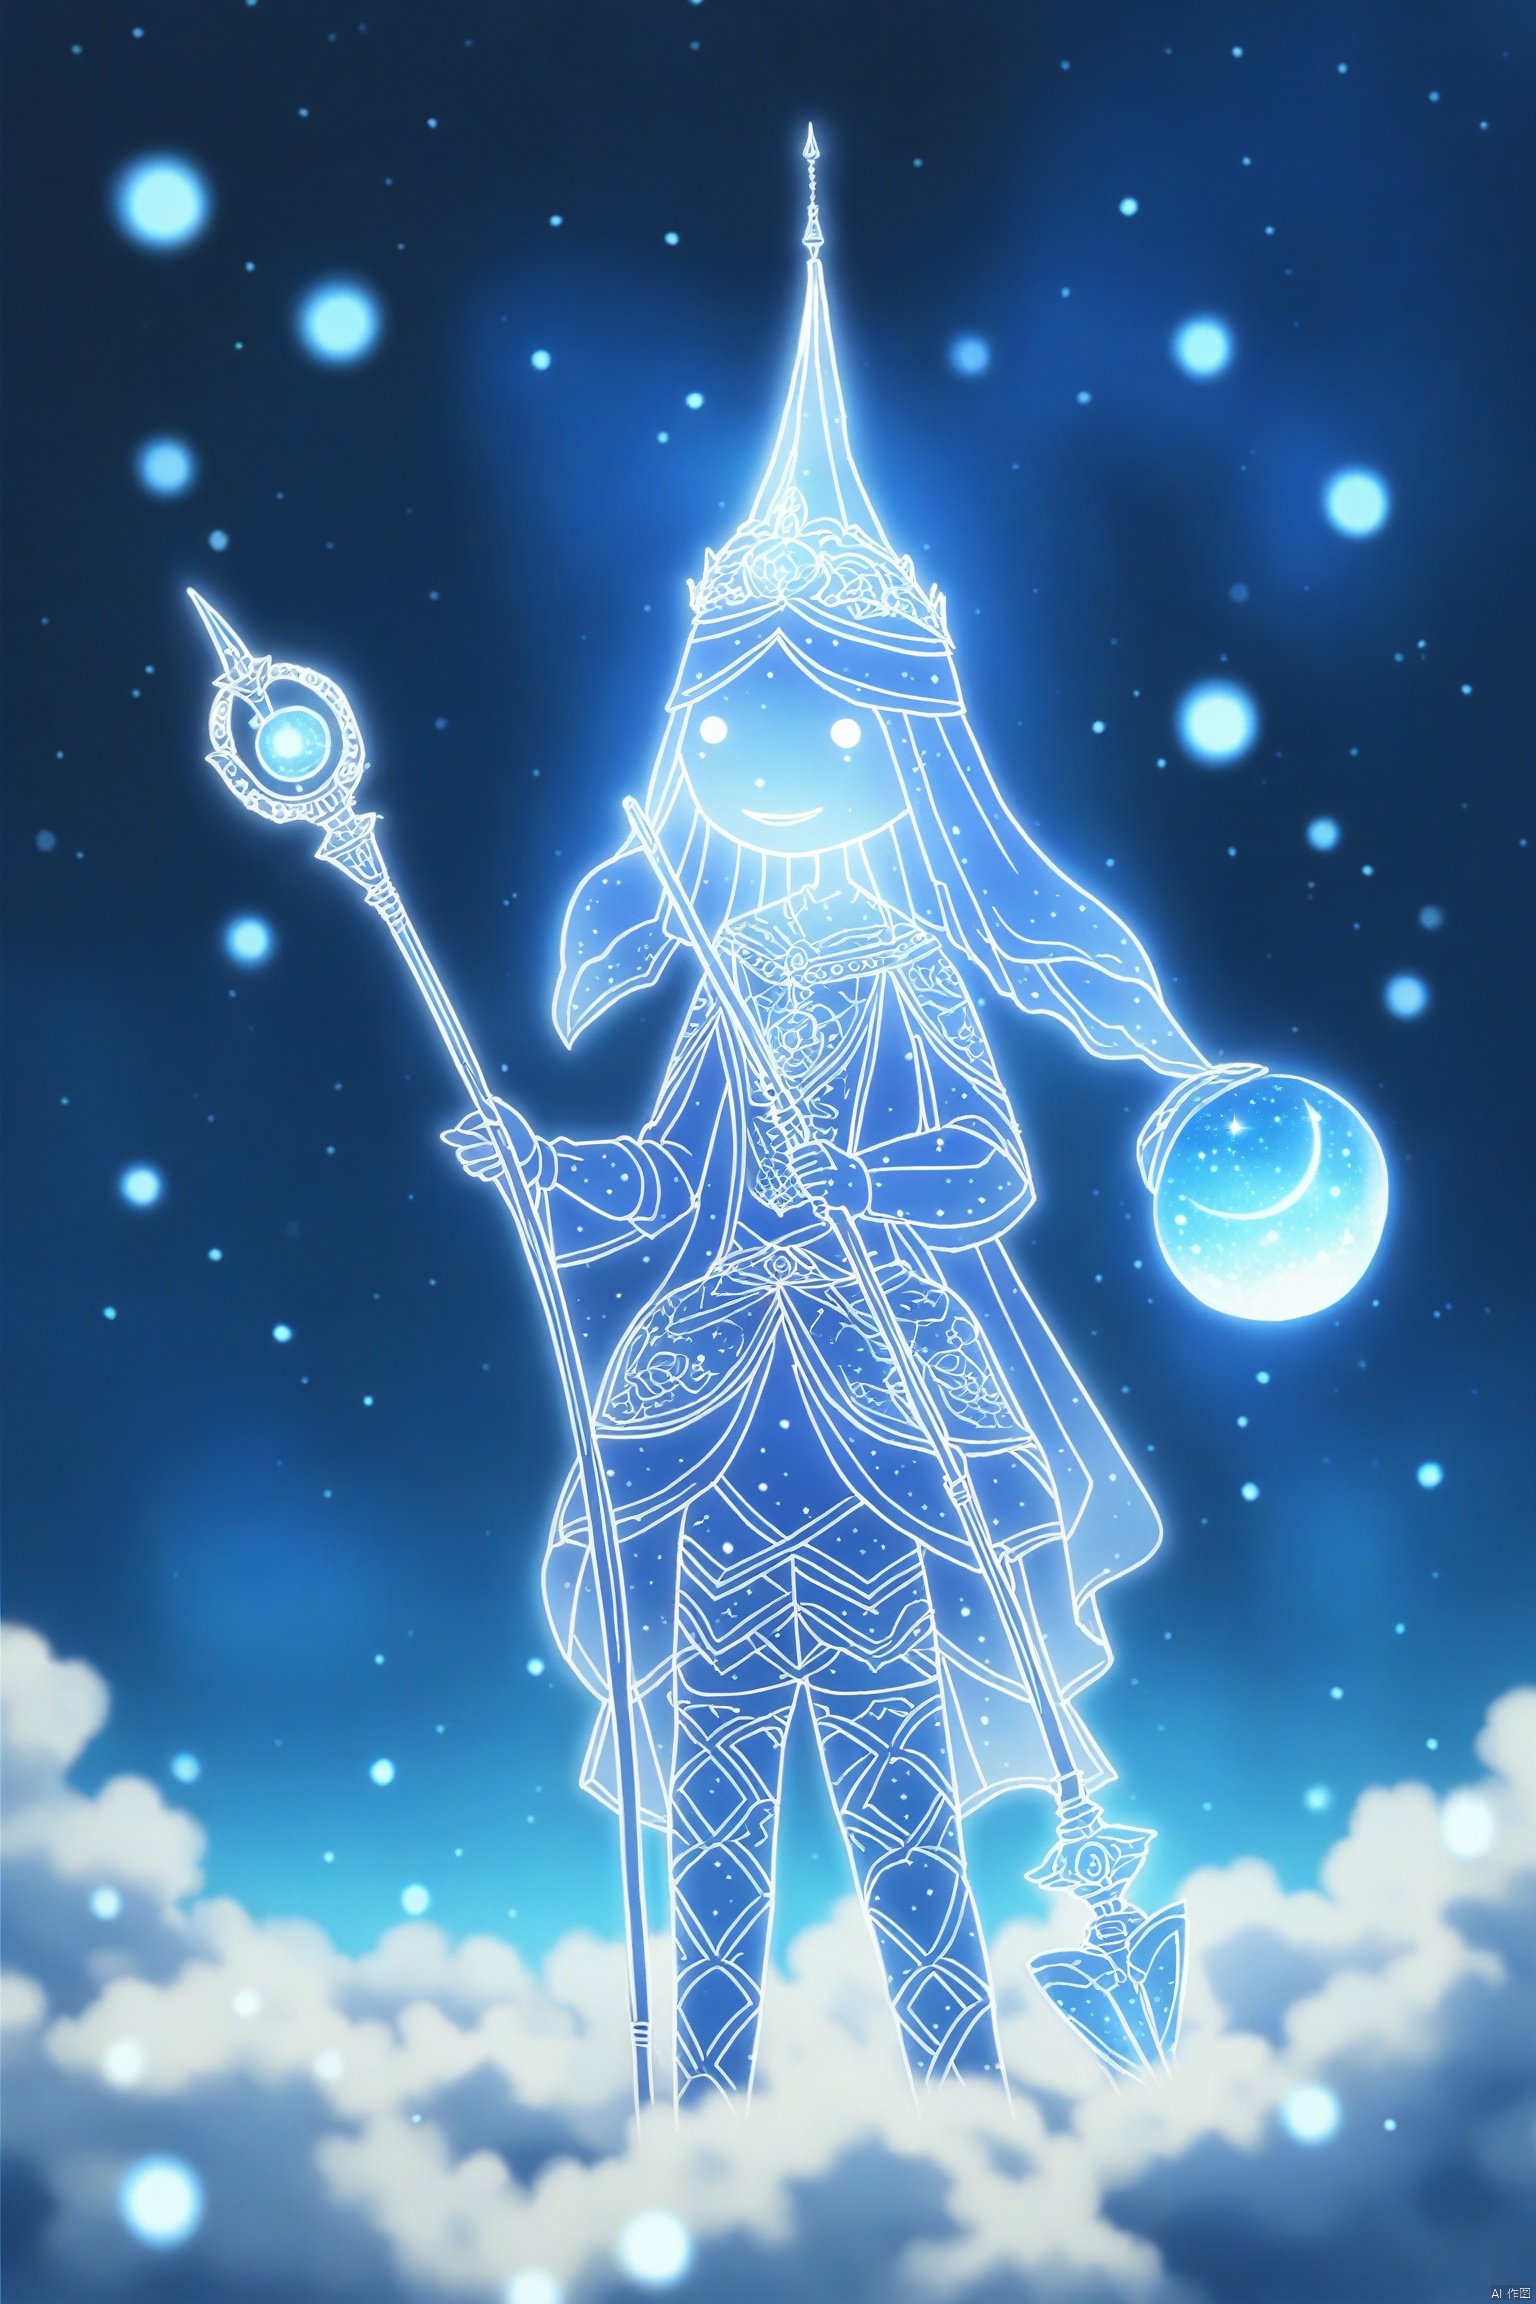  Highly detailed Powerfull blue god holding a staff in the 5th, detailed face, detailed body, dimension, very colorfull, highly detailed, the enviroment is a dreamy palace in the clouds with the night sky full of stars